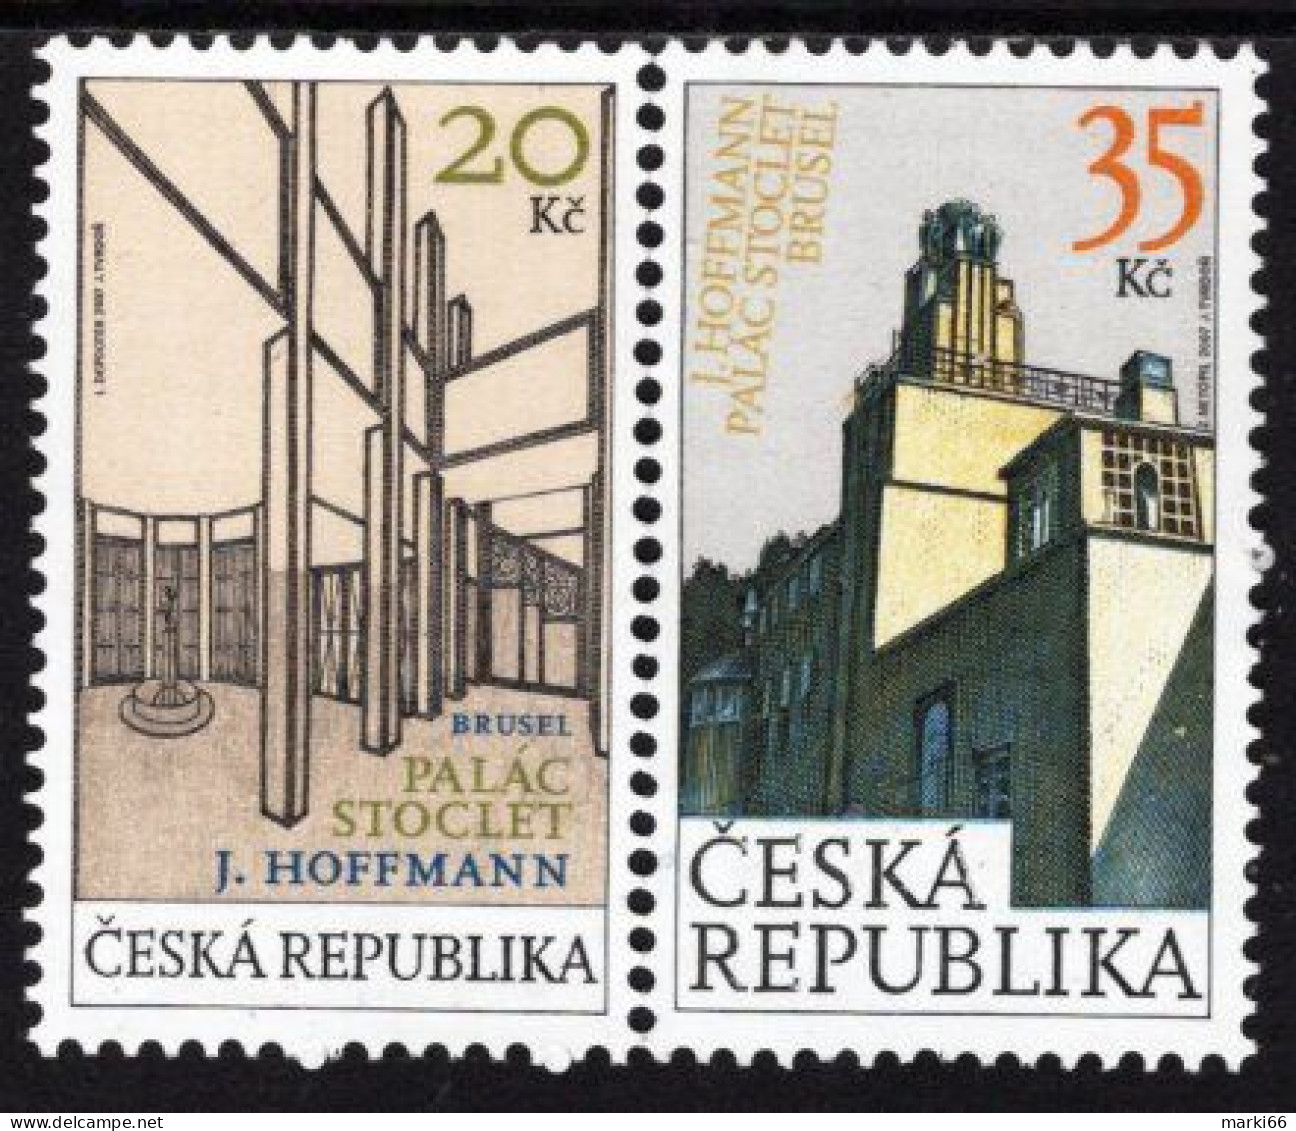 Czech Republic - 2007 - Architecture - Stoclet Palace - Joint Issue With Belgium - Mint Stamp Set - Ungebraucht